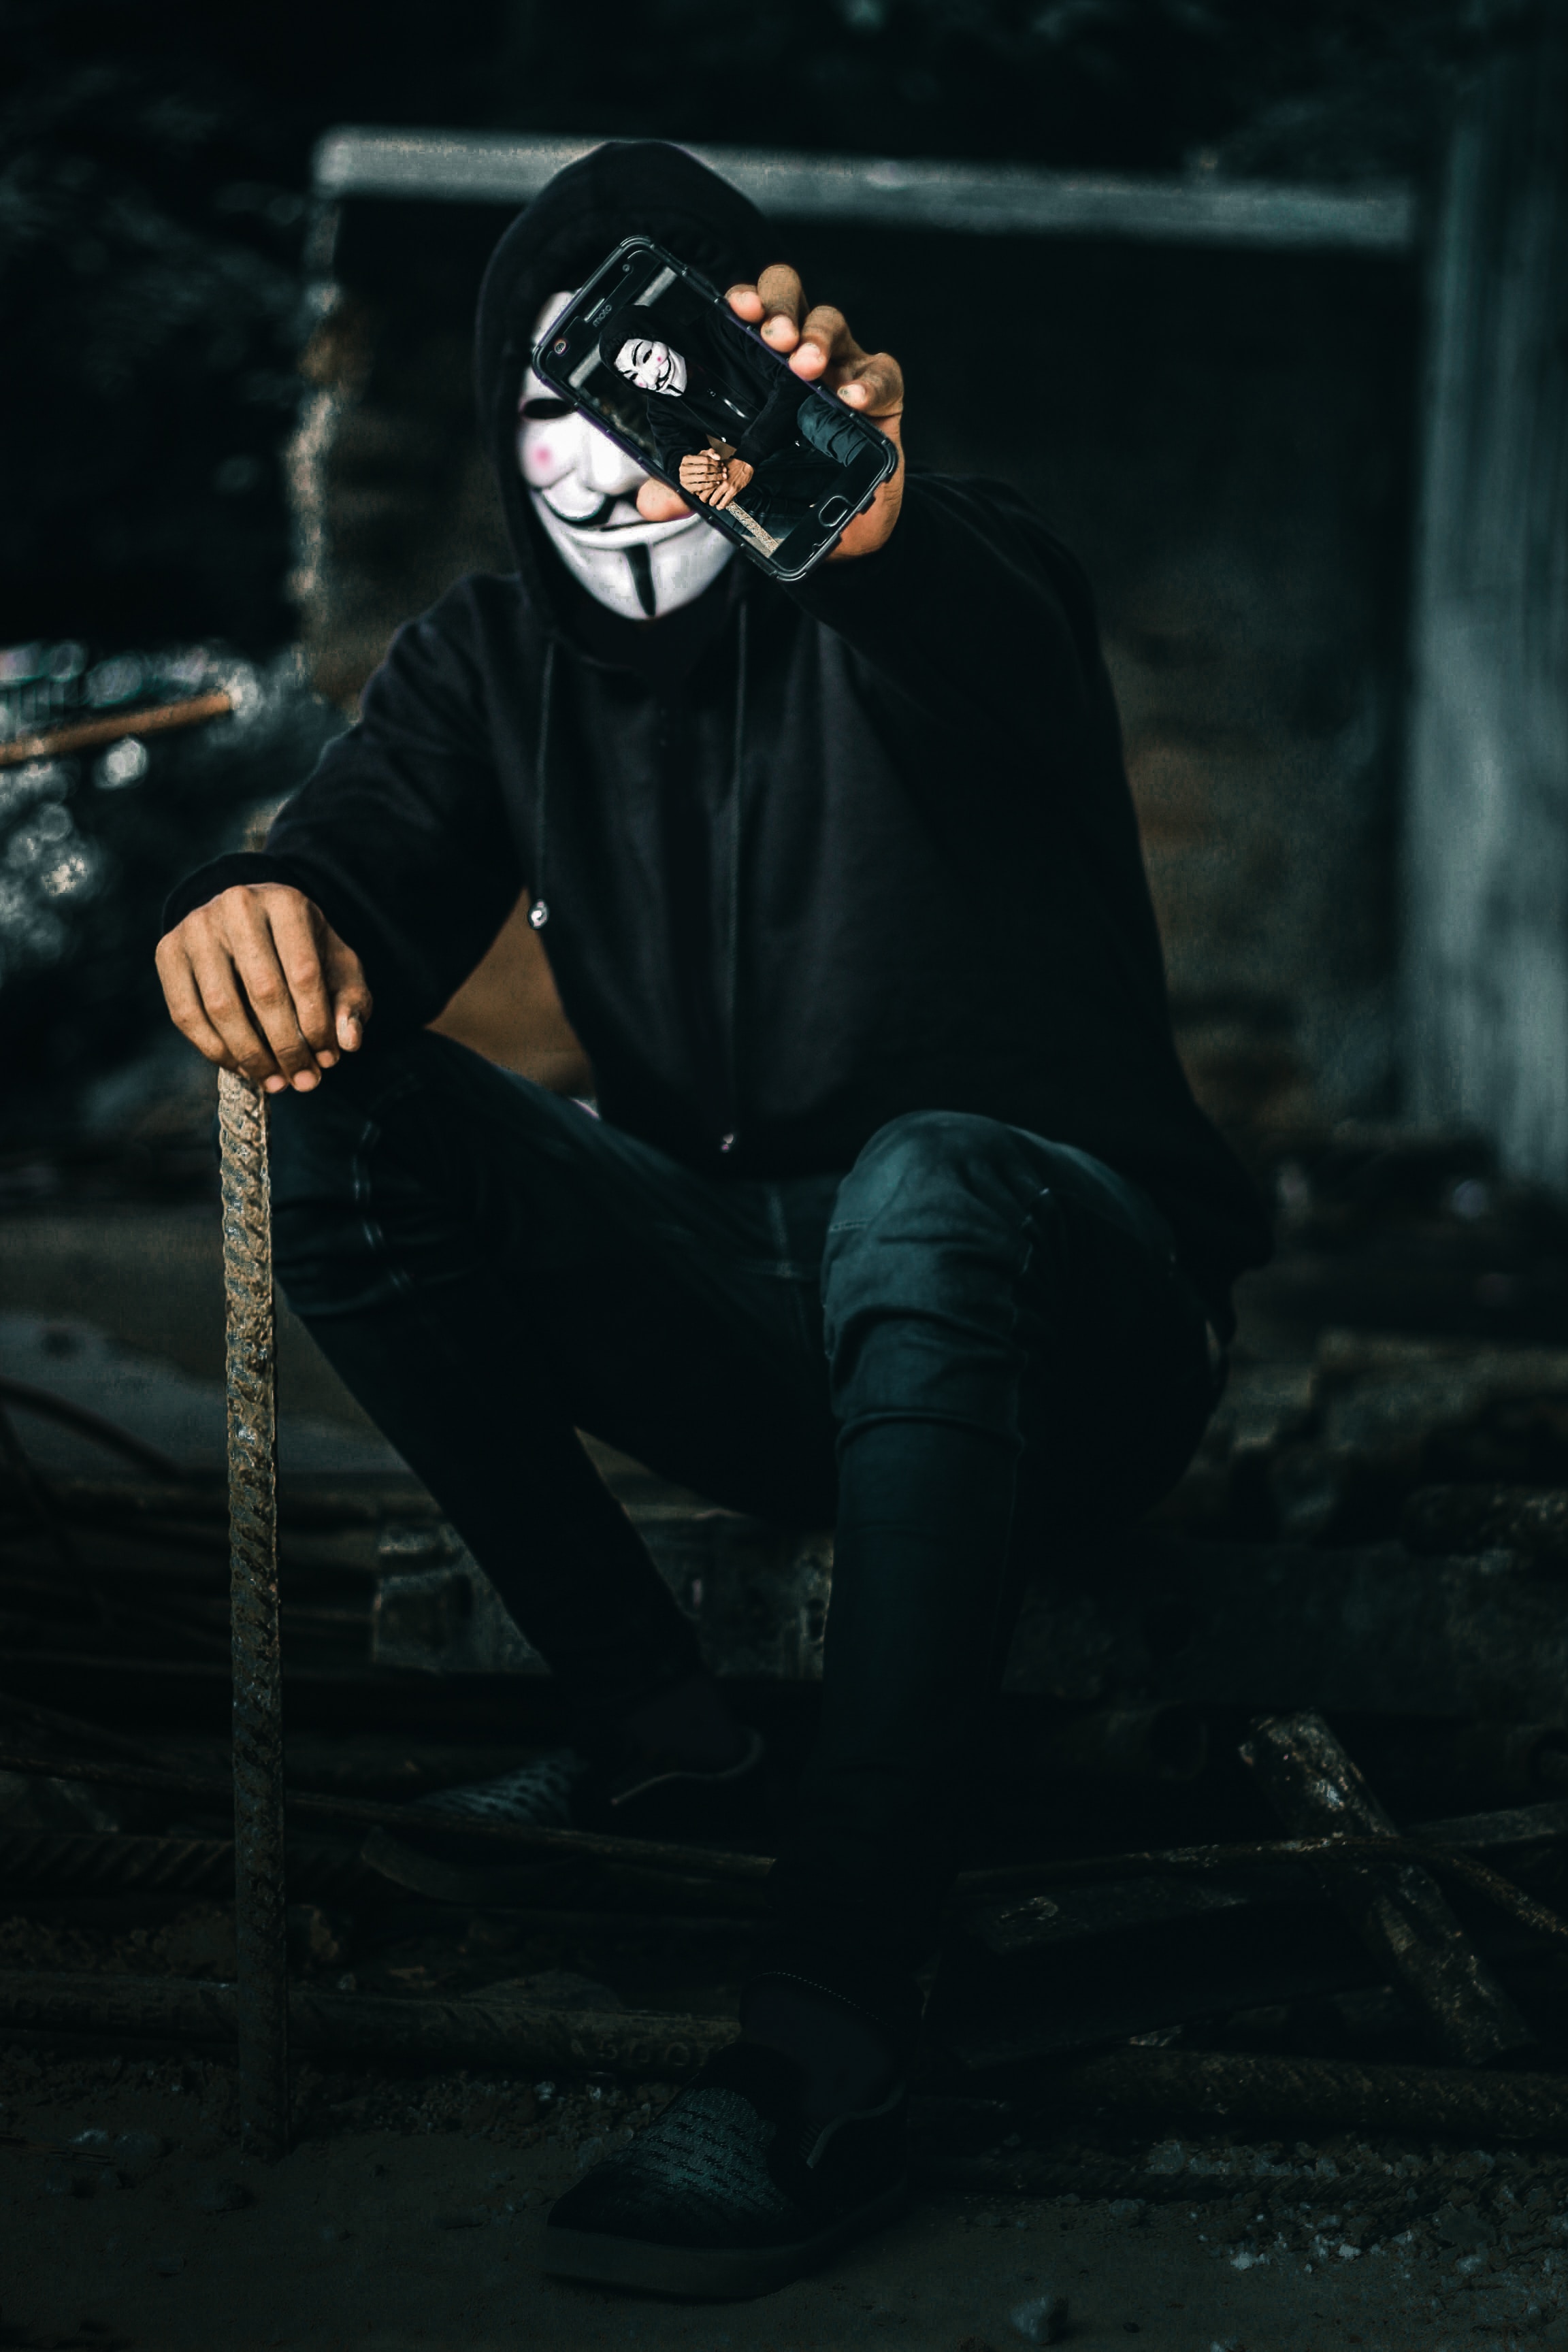 Full HD mask, miscellanea, miscellaneous, human, person, anonymous, telephone